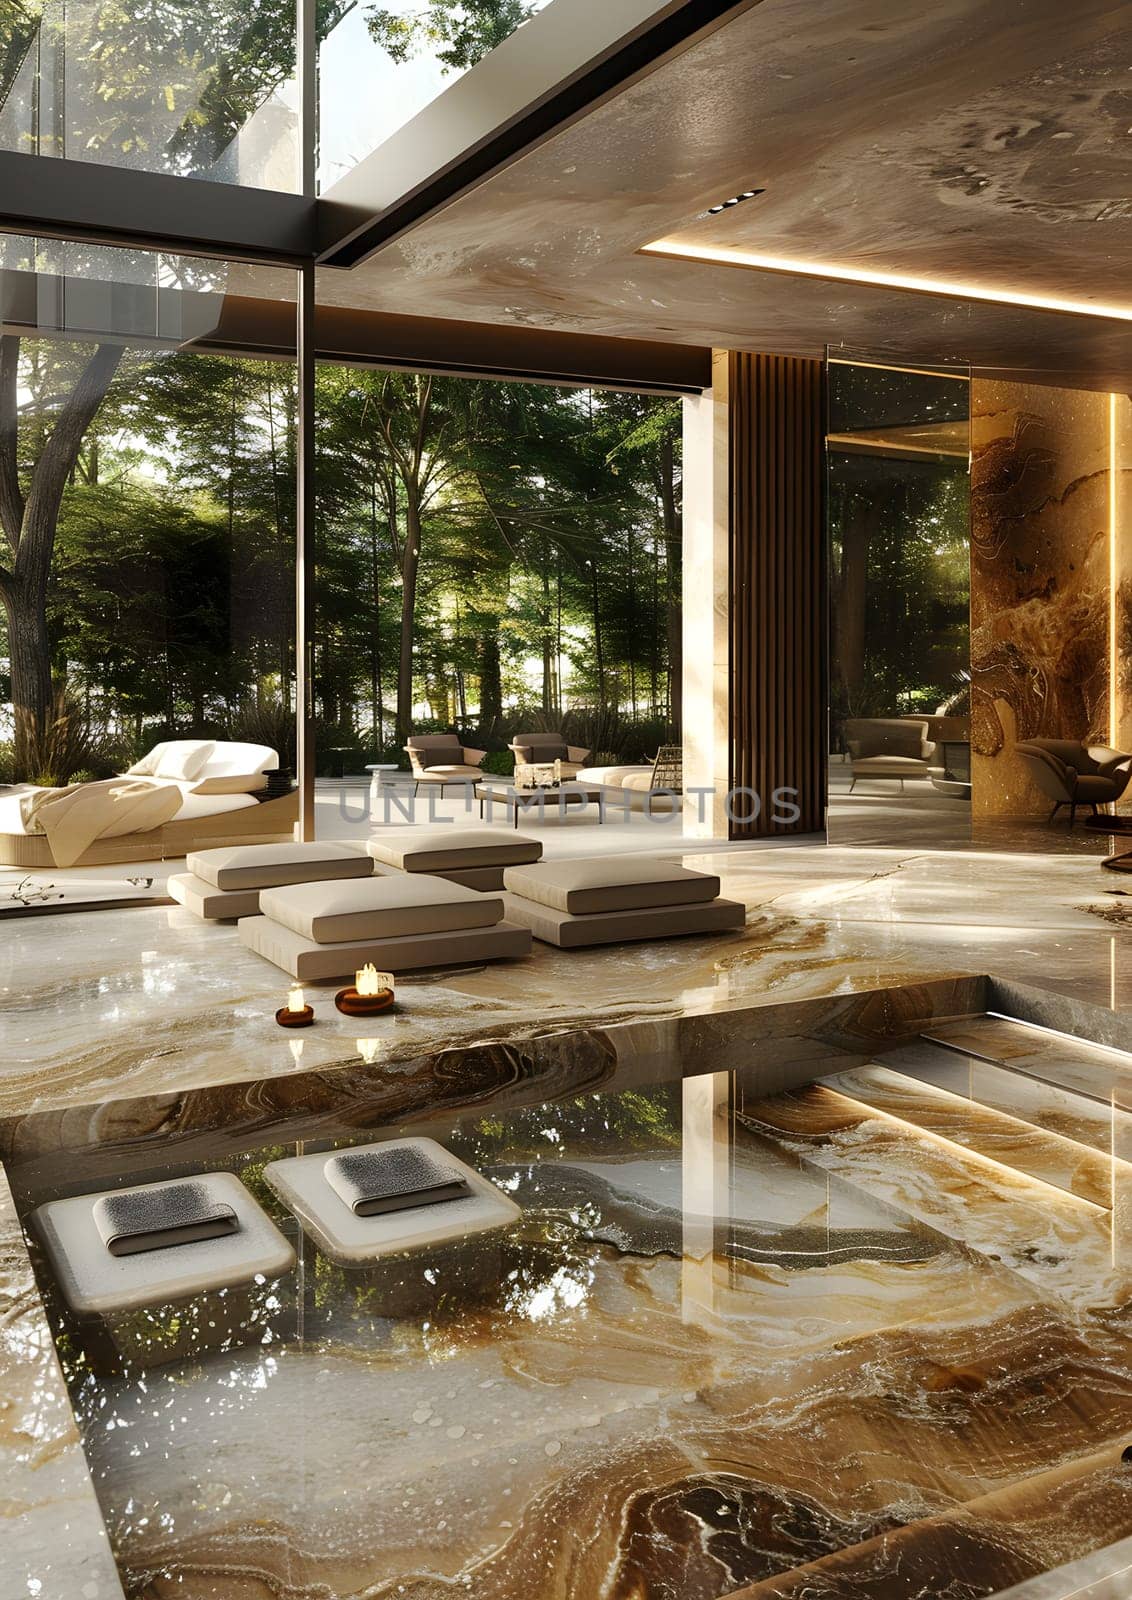 The room features a spacious pool, surrounded by hardwood flooring and planks by Nadtochiy